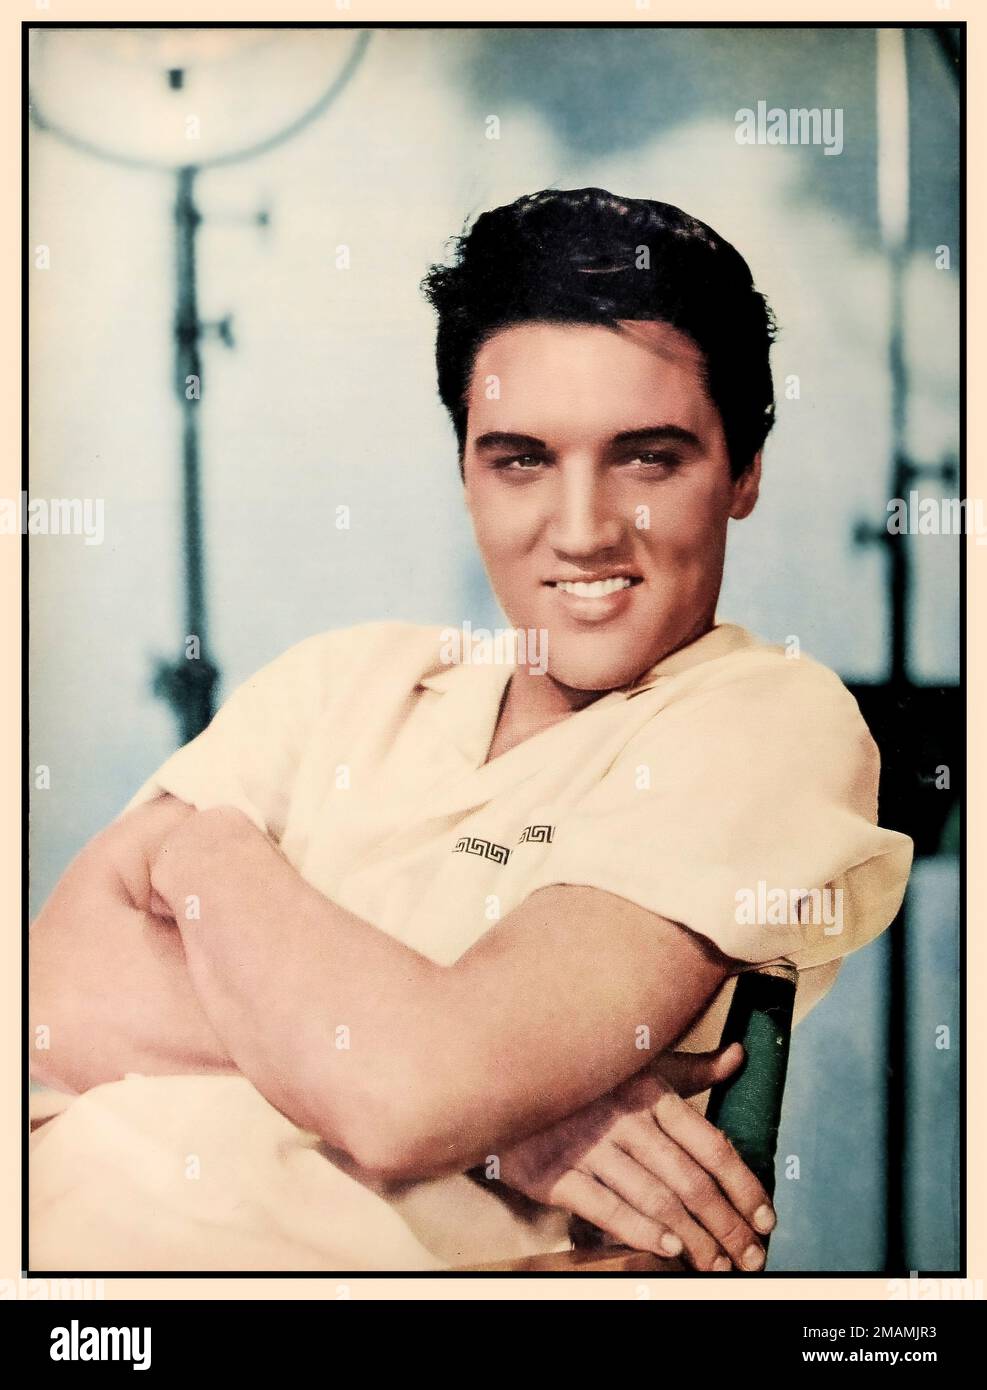 Elvis Presley Hollywood Promotioal Portrait Still of Elvis Presley printed at the time he was leaving to join the army. Elvis Presley relaxed informal stills portrait on the 1958 set of King Creole ©️Paramount Studios  Date 1 June 1958 Stock Photo